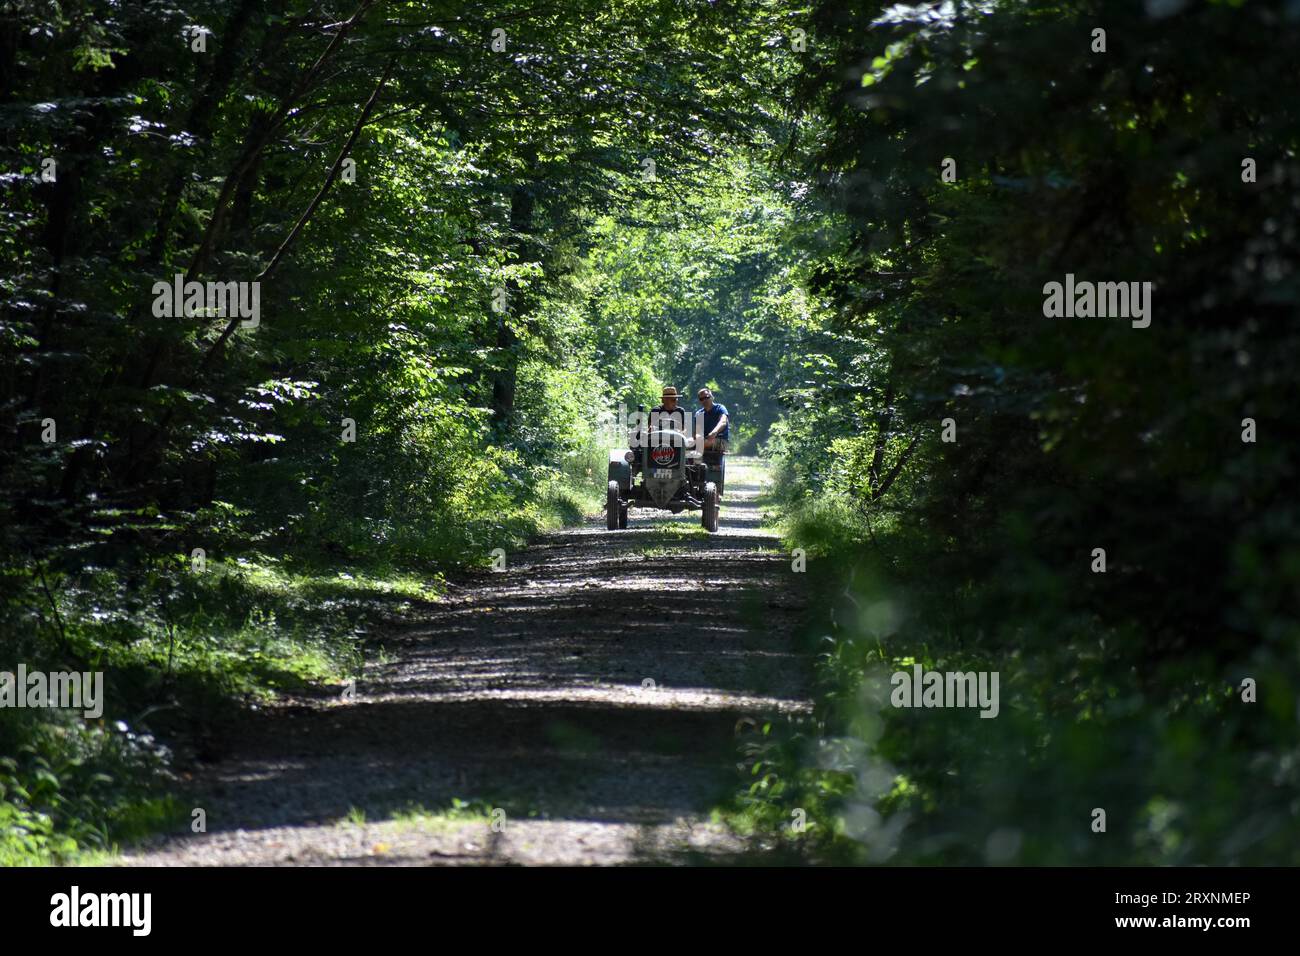 Excursion in the forest with a vintage tractor Eicher Diesel, Emmerting, Bavaria, Germany Stock Photo